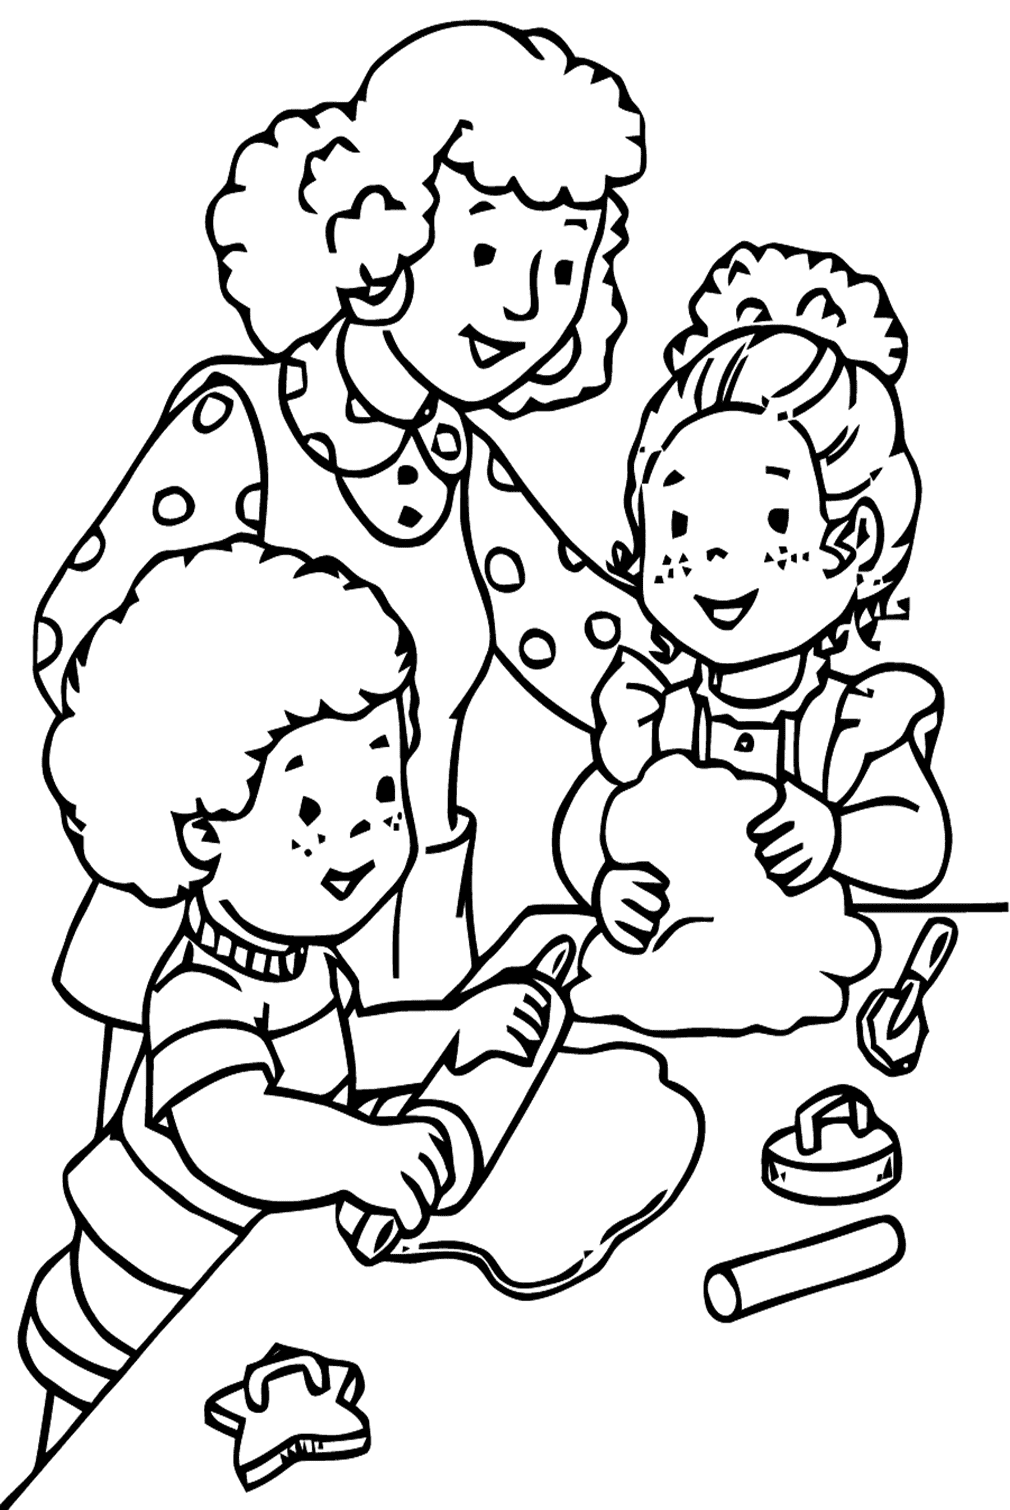 First Day Of School Coloring Page For Kids